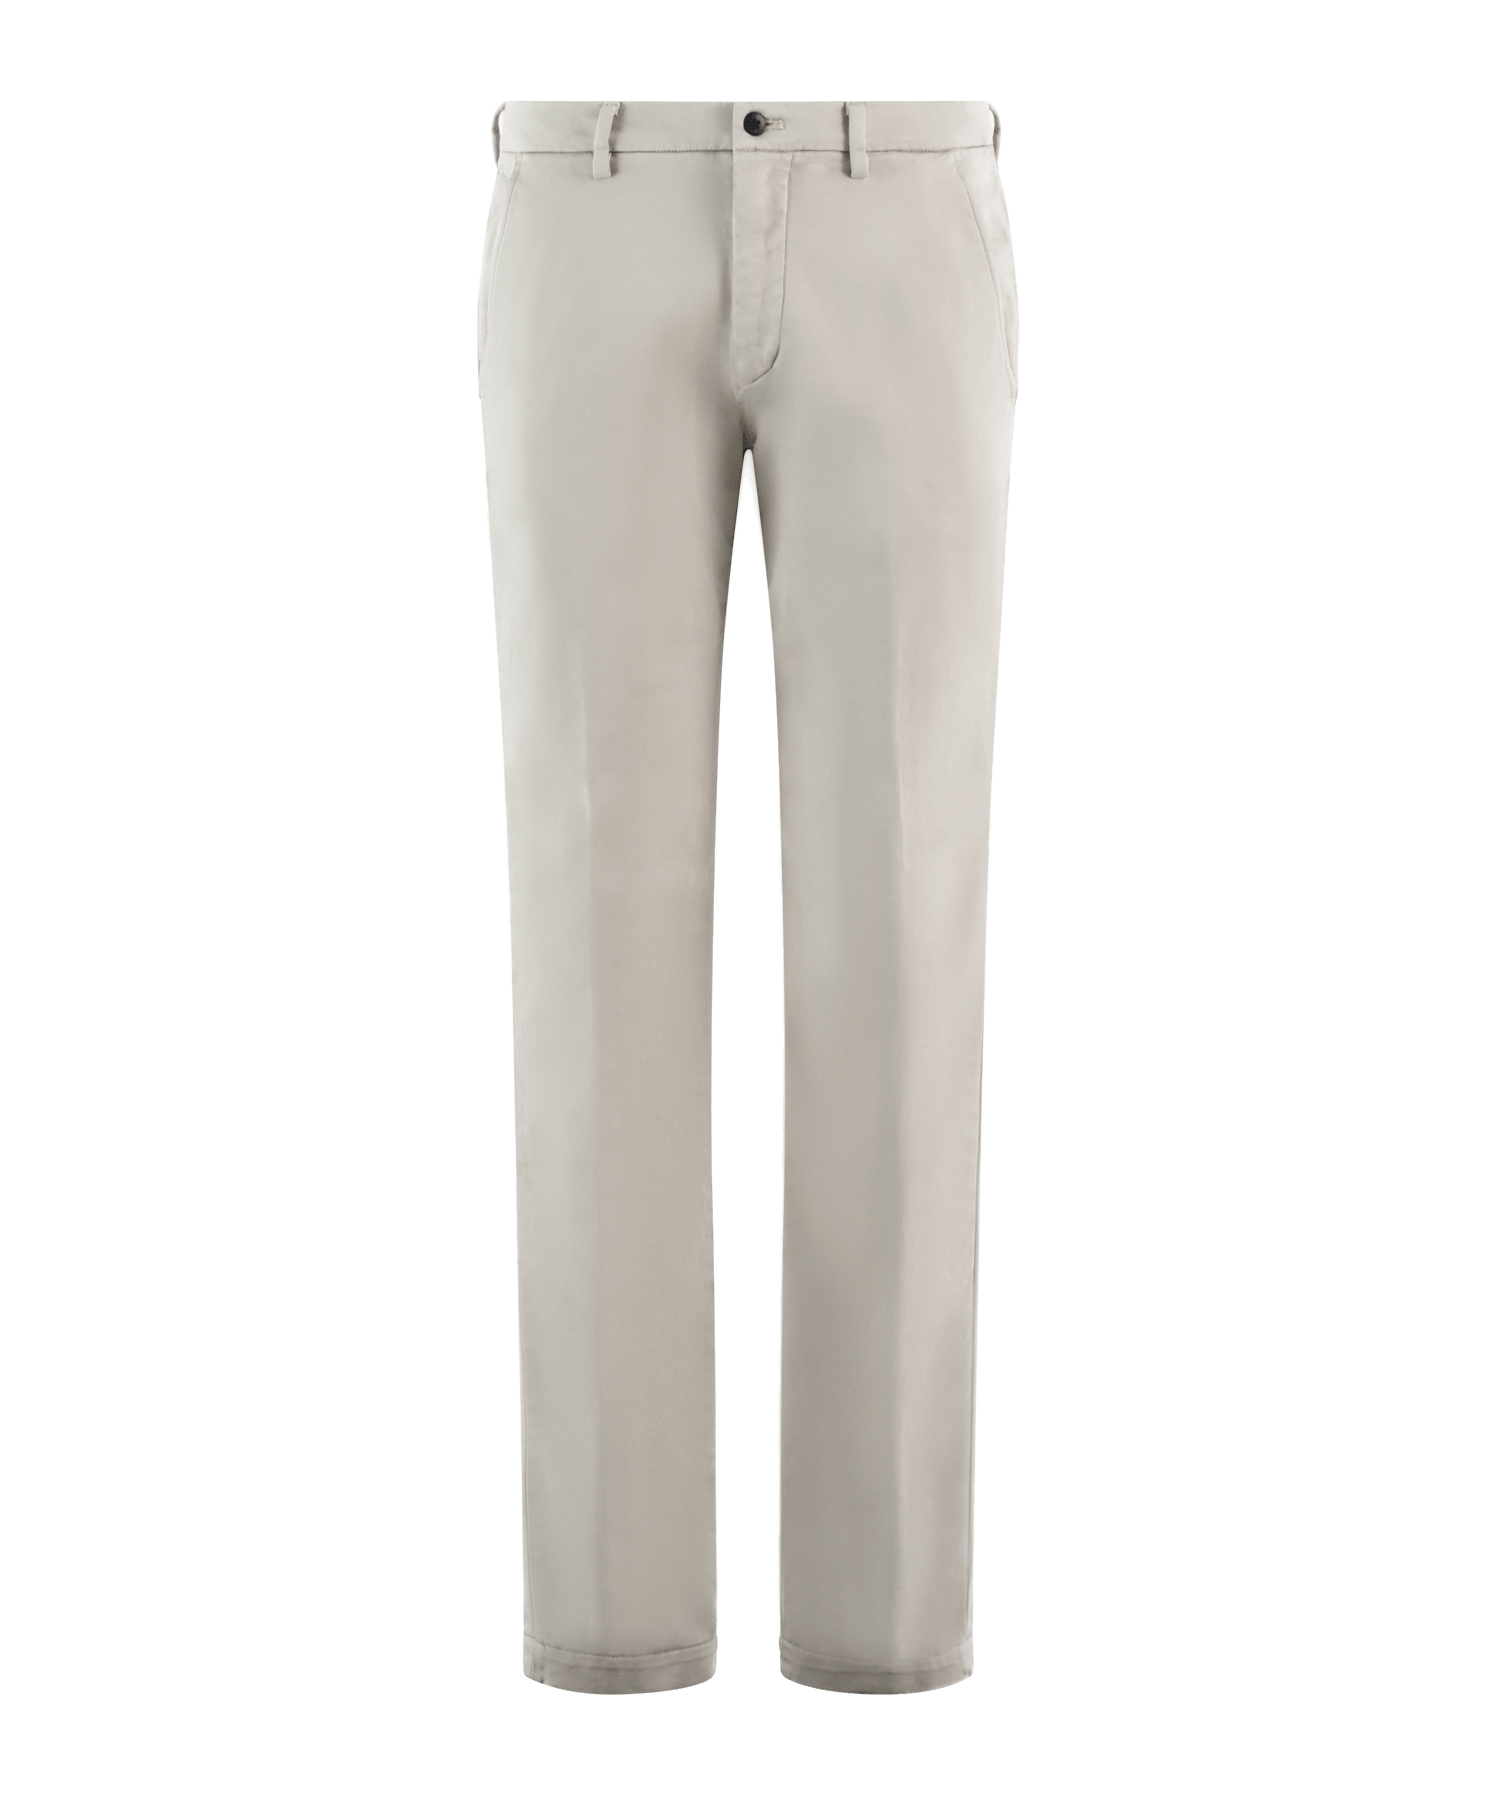 CHINO SF TRAVEL 44 / Beige / taupe